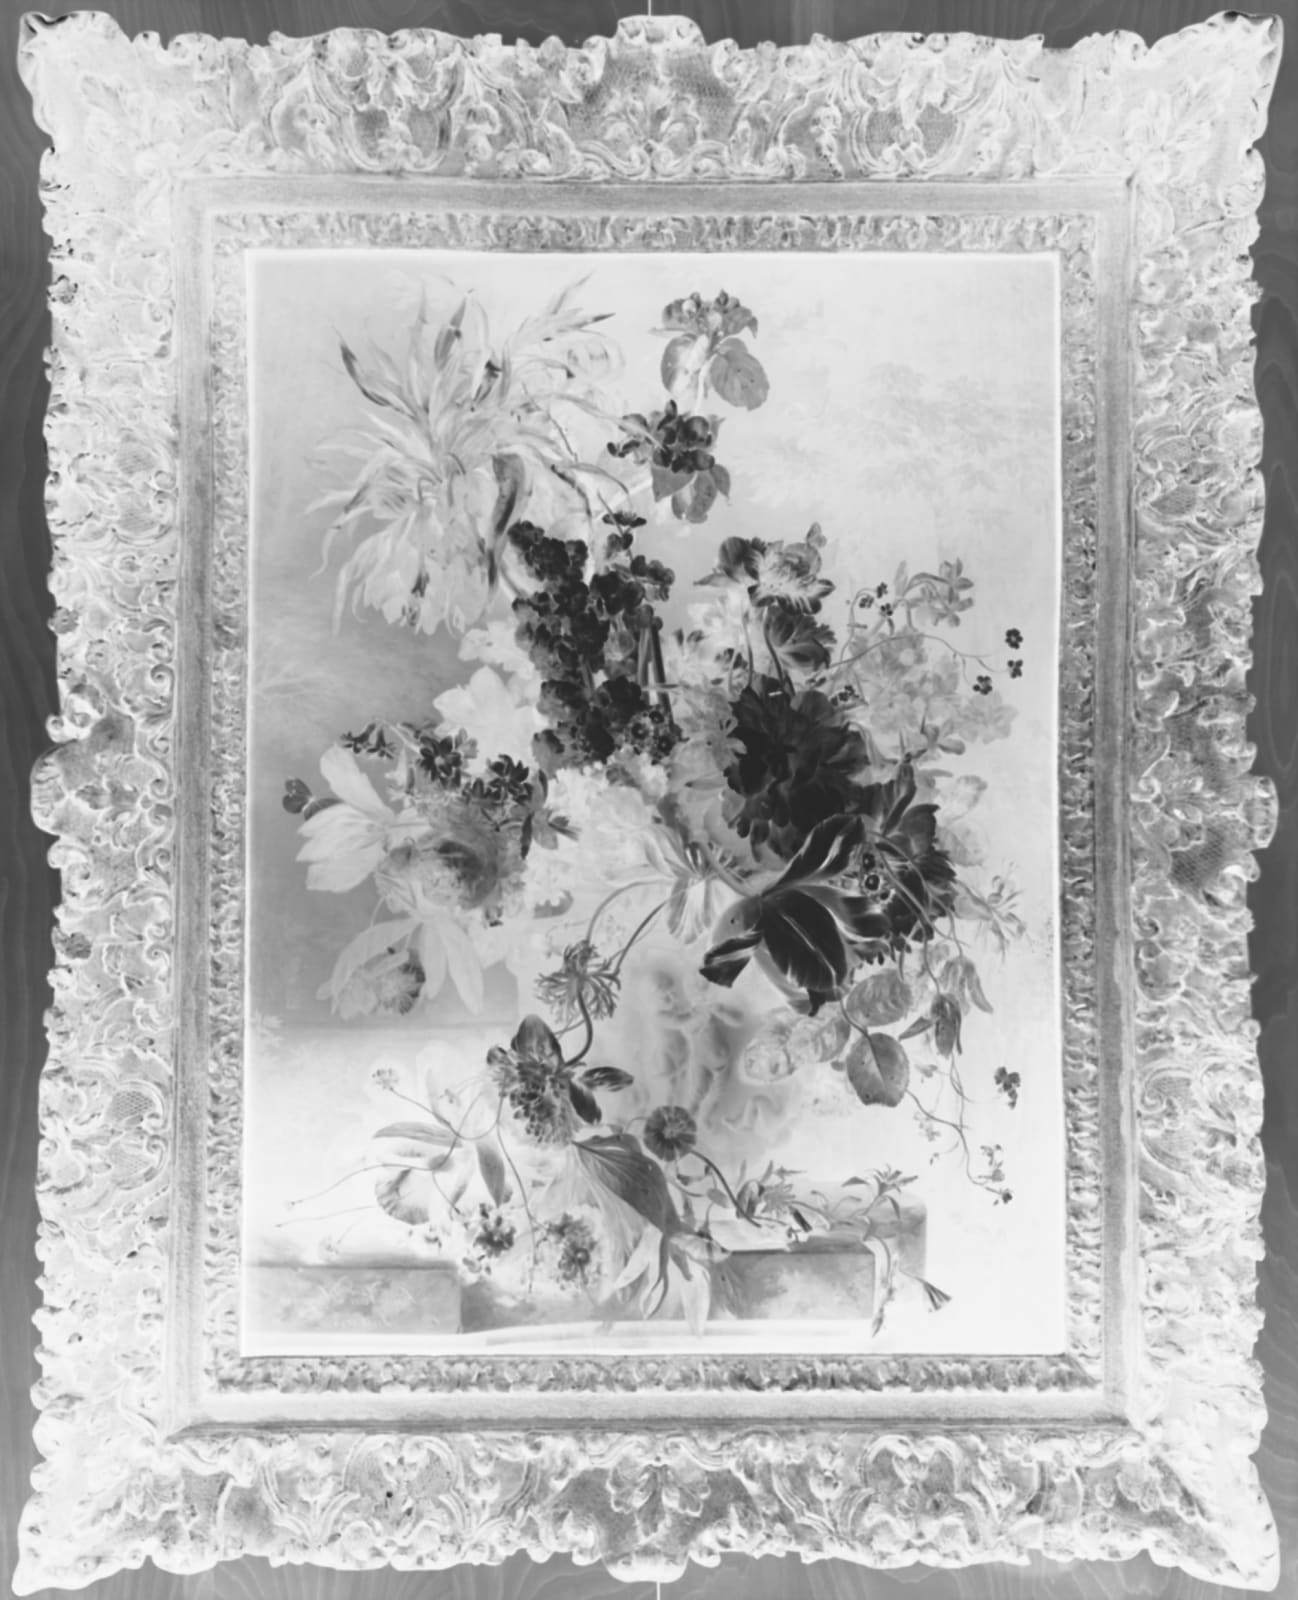 camera obscura image of Jan van Huysum's painting Bouquet of Flowers in an Urn from LACMA collection